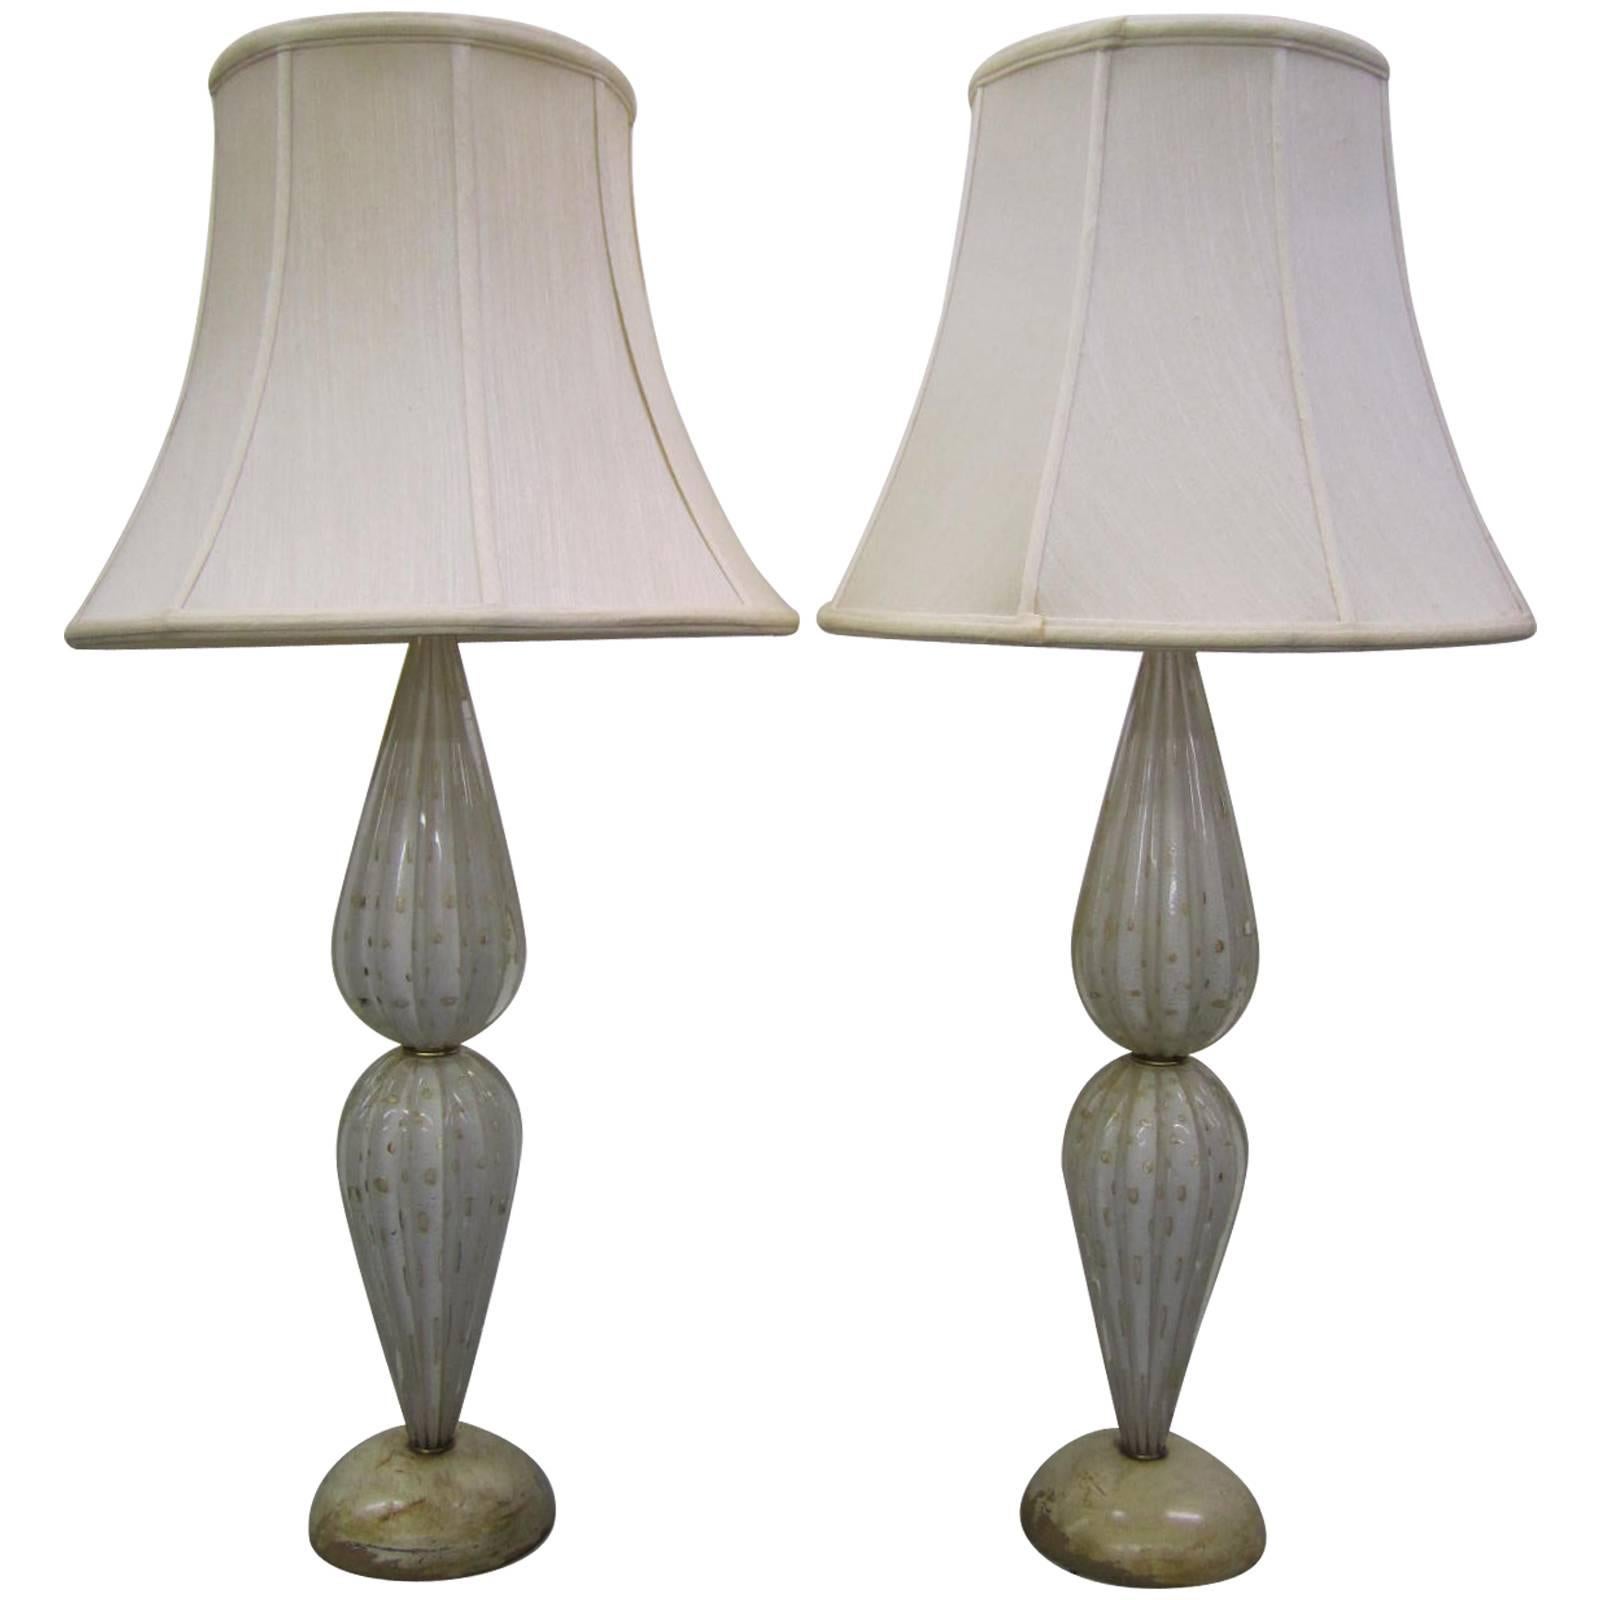 Stunning Pair of Barovier & Toso Murano Lamps with Gold Flecking